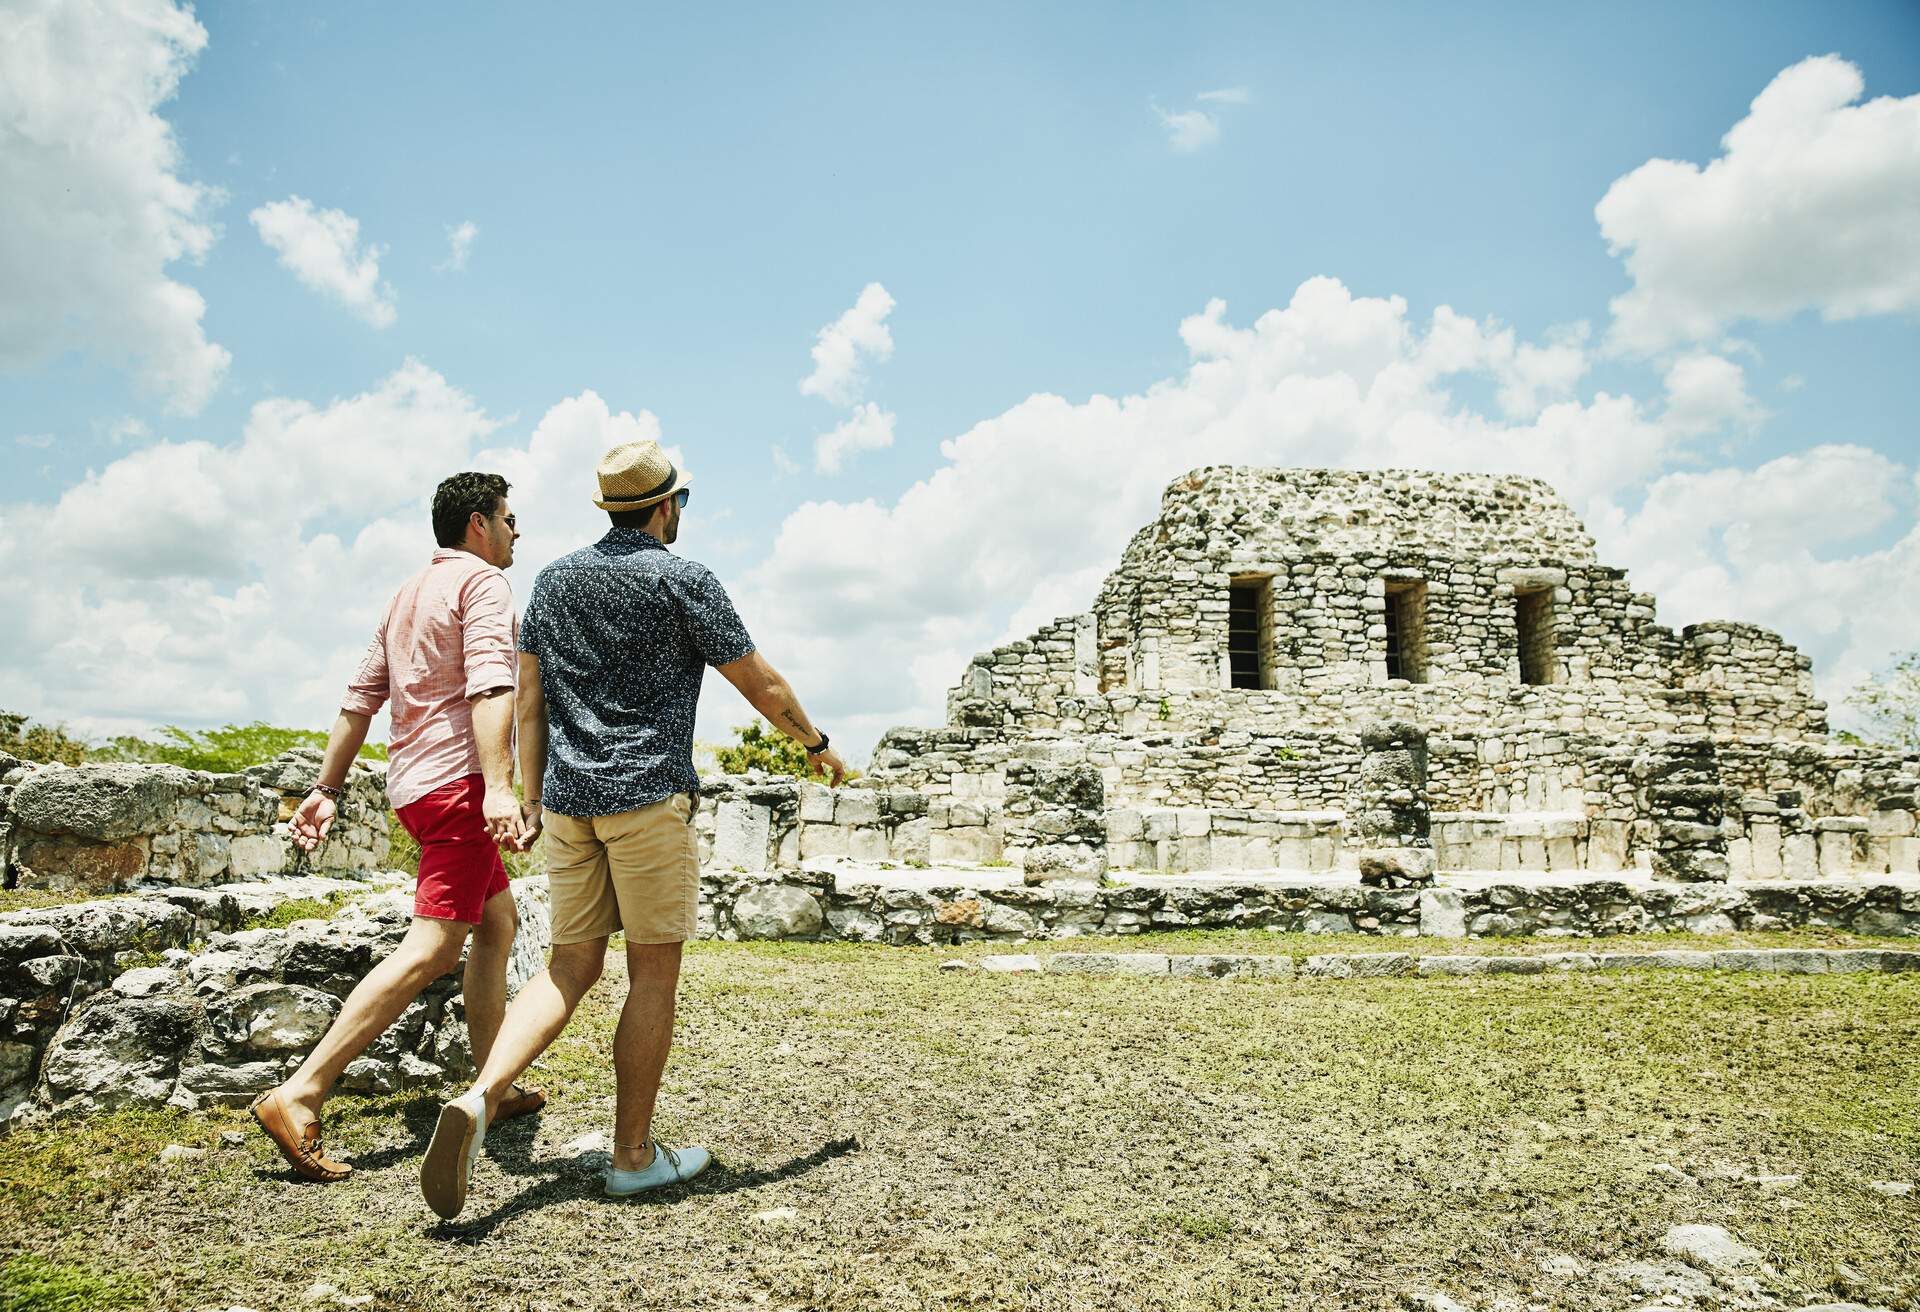 dest_mexico_yucatan_mayapan-mayan-ruins_theme_people_gay-couple_lgbtq_gettyimages-993909634_universal_within-usage-period_86843